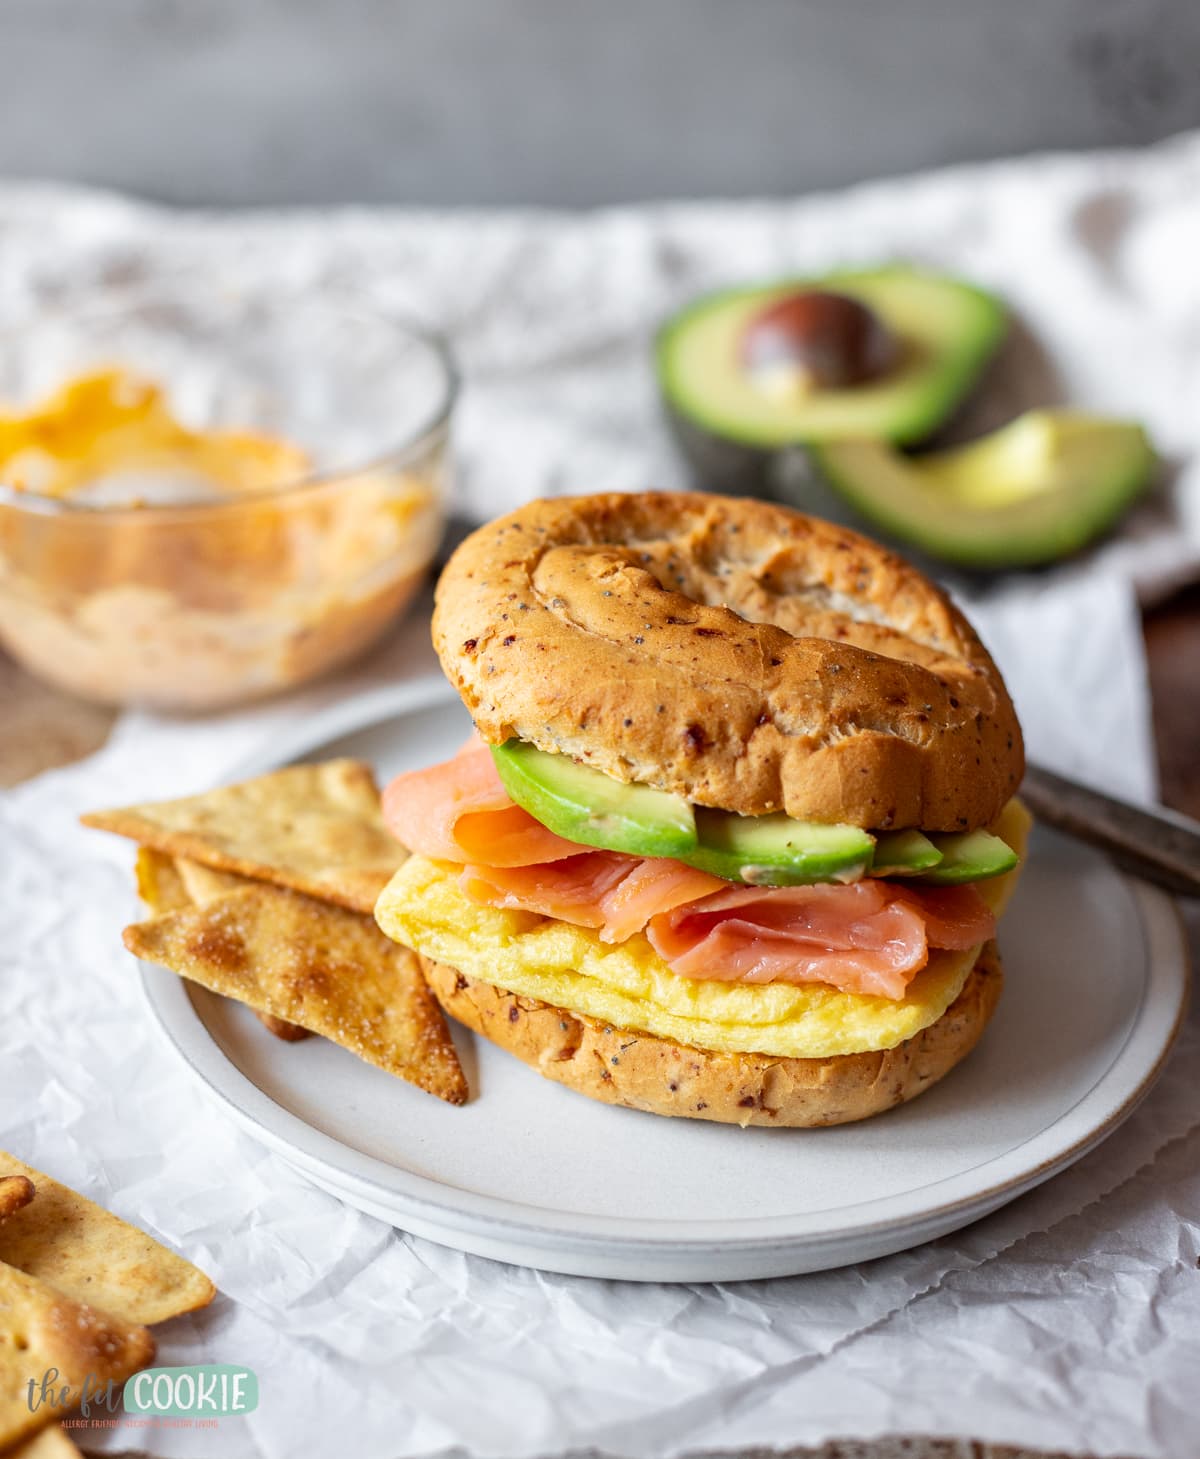 A breakfast sandwich with salmon and avocado on a bagel.